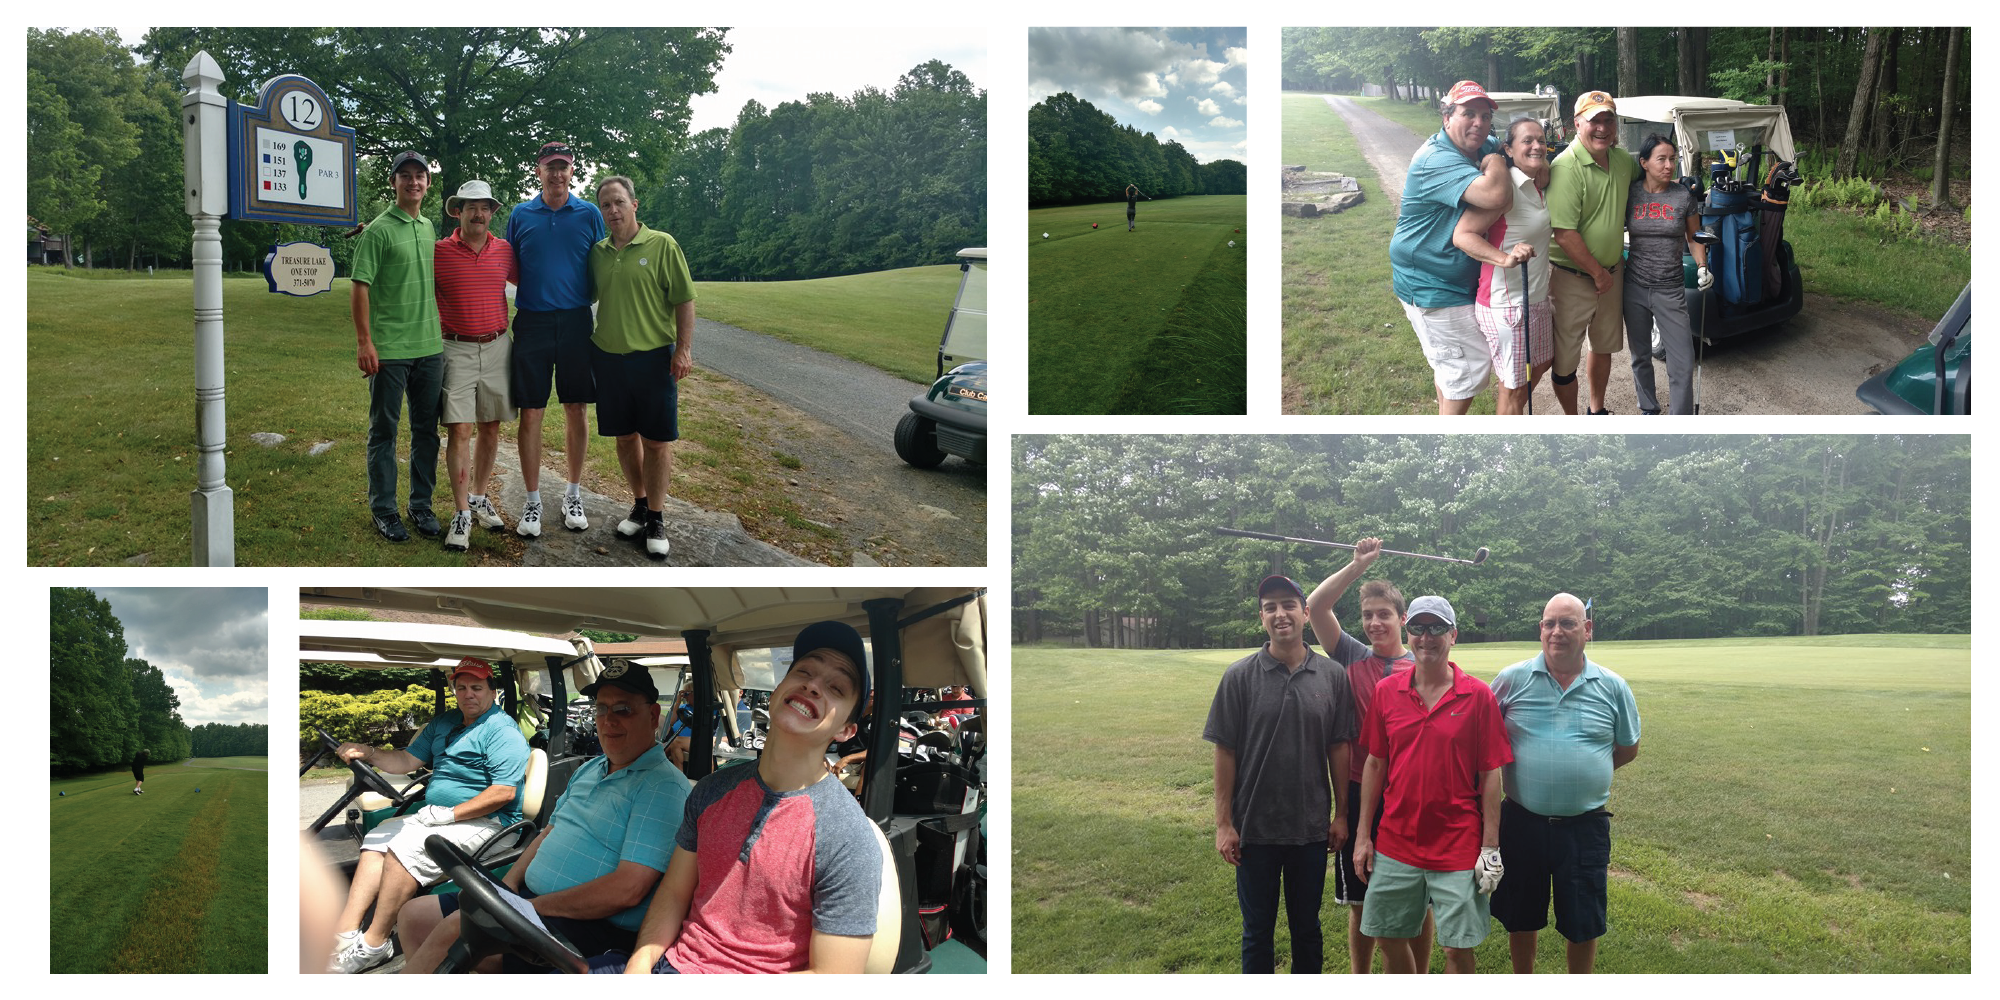 2nd Annual Mark Vrahas Foundation Golf Outing & Picnic